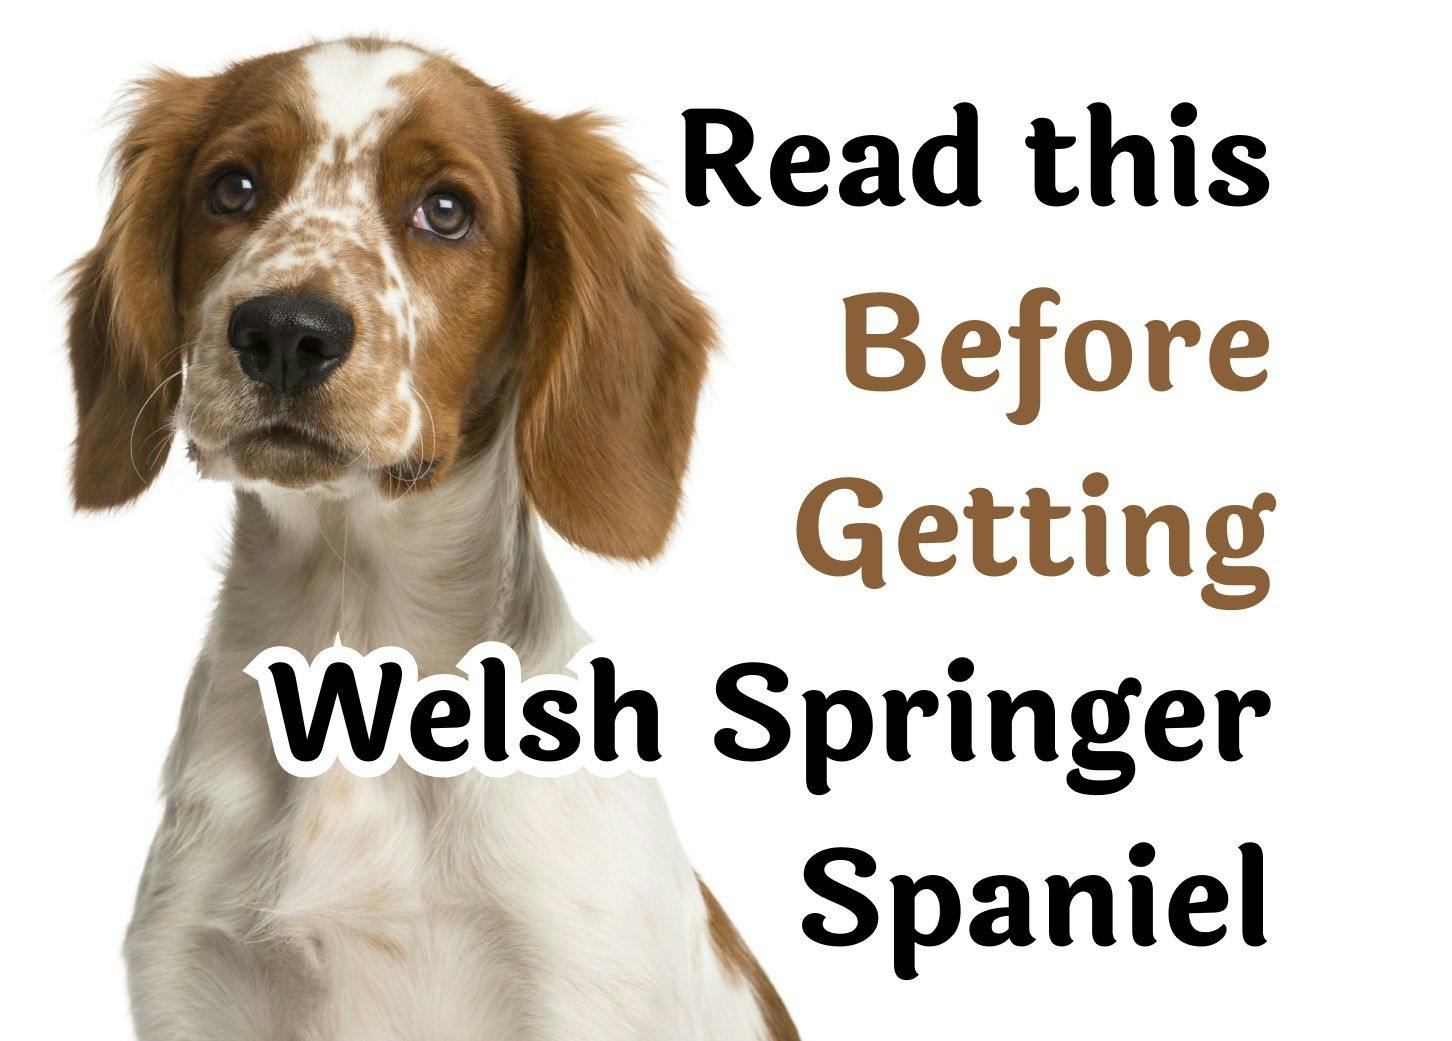 Things to Consider Before Getting a Welsh Springer Spaniel